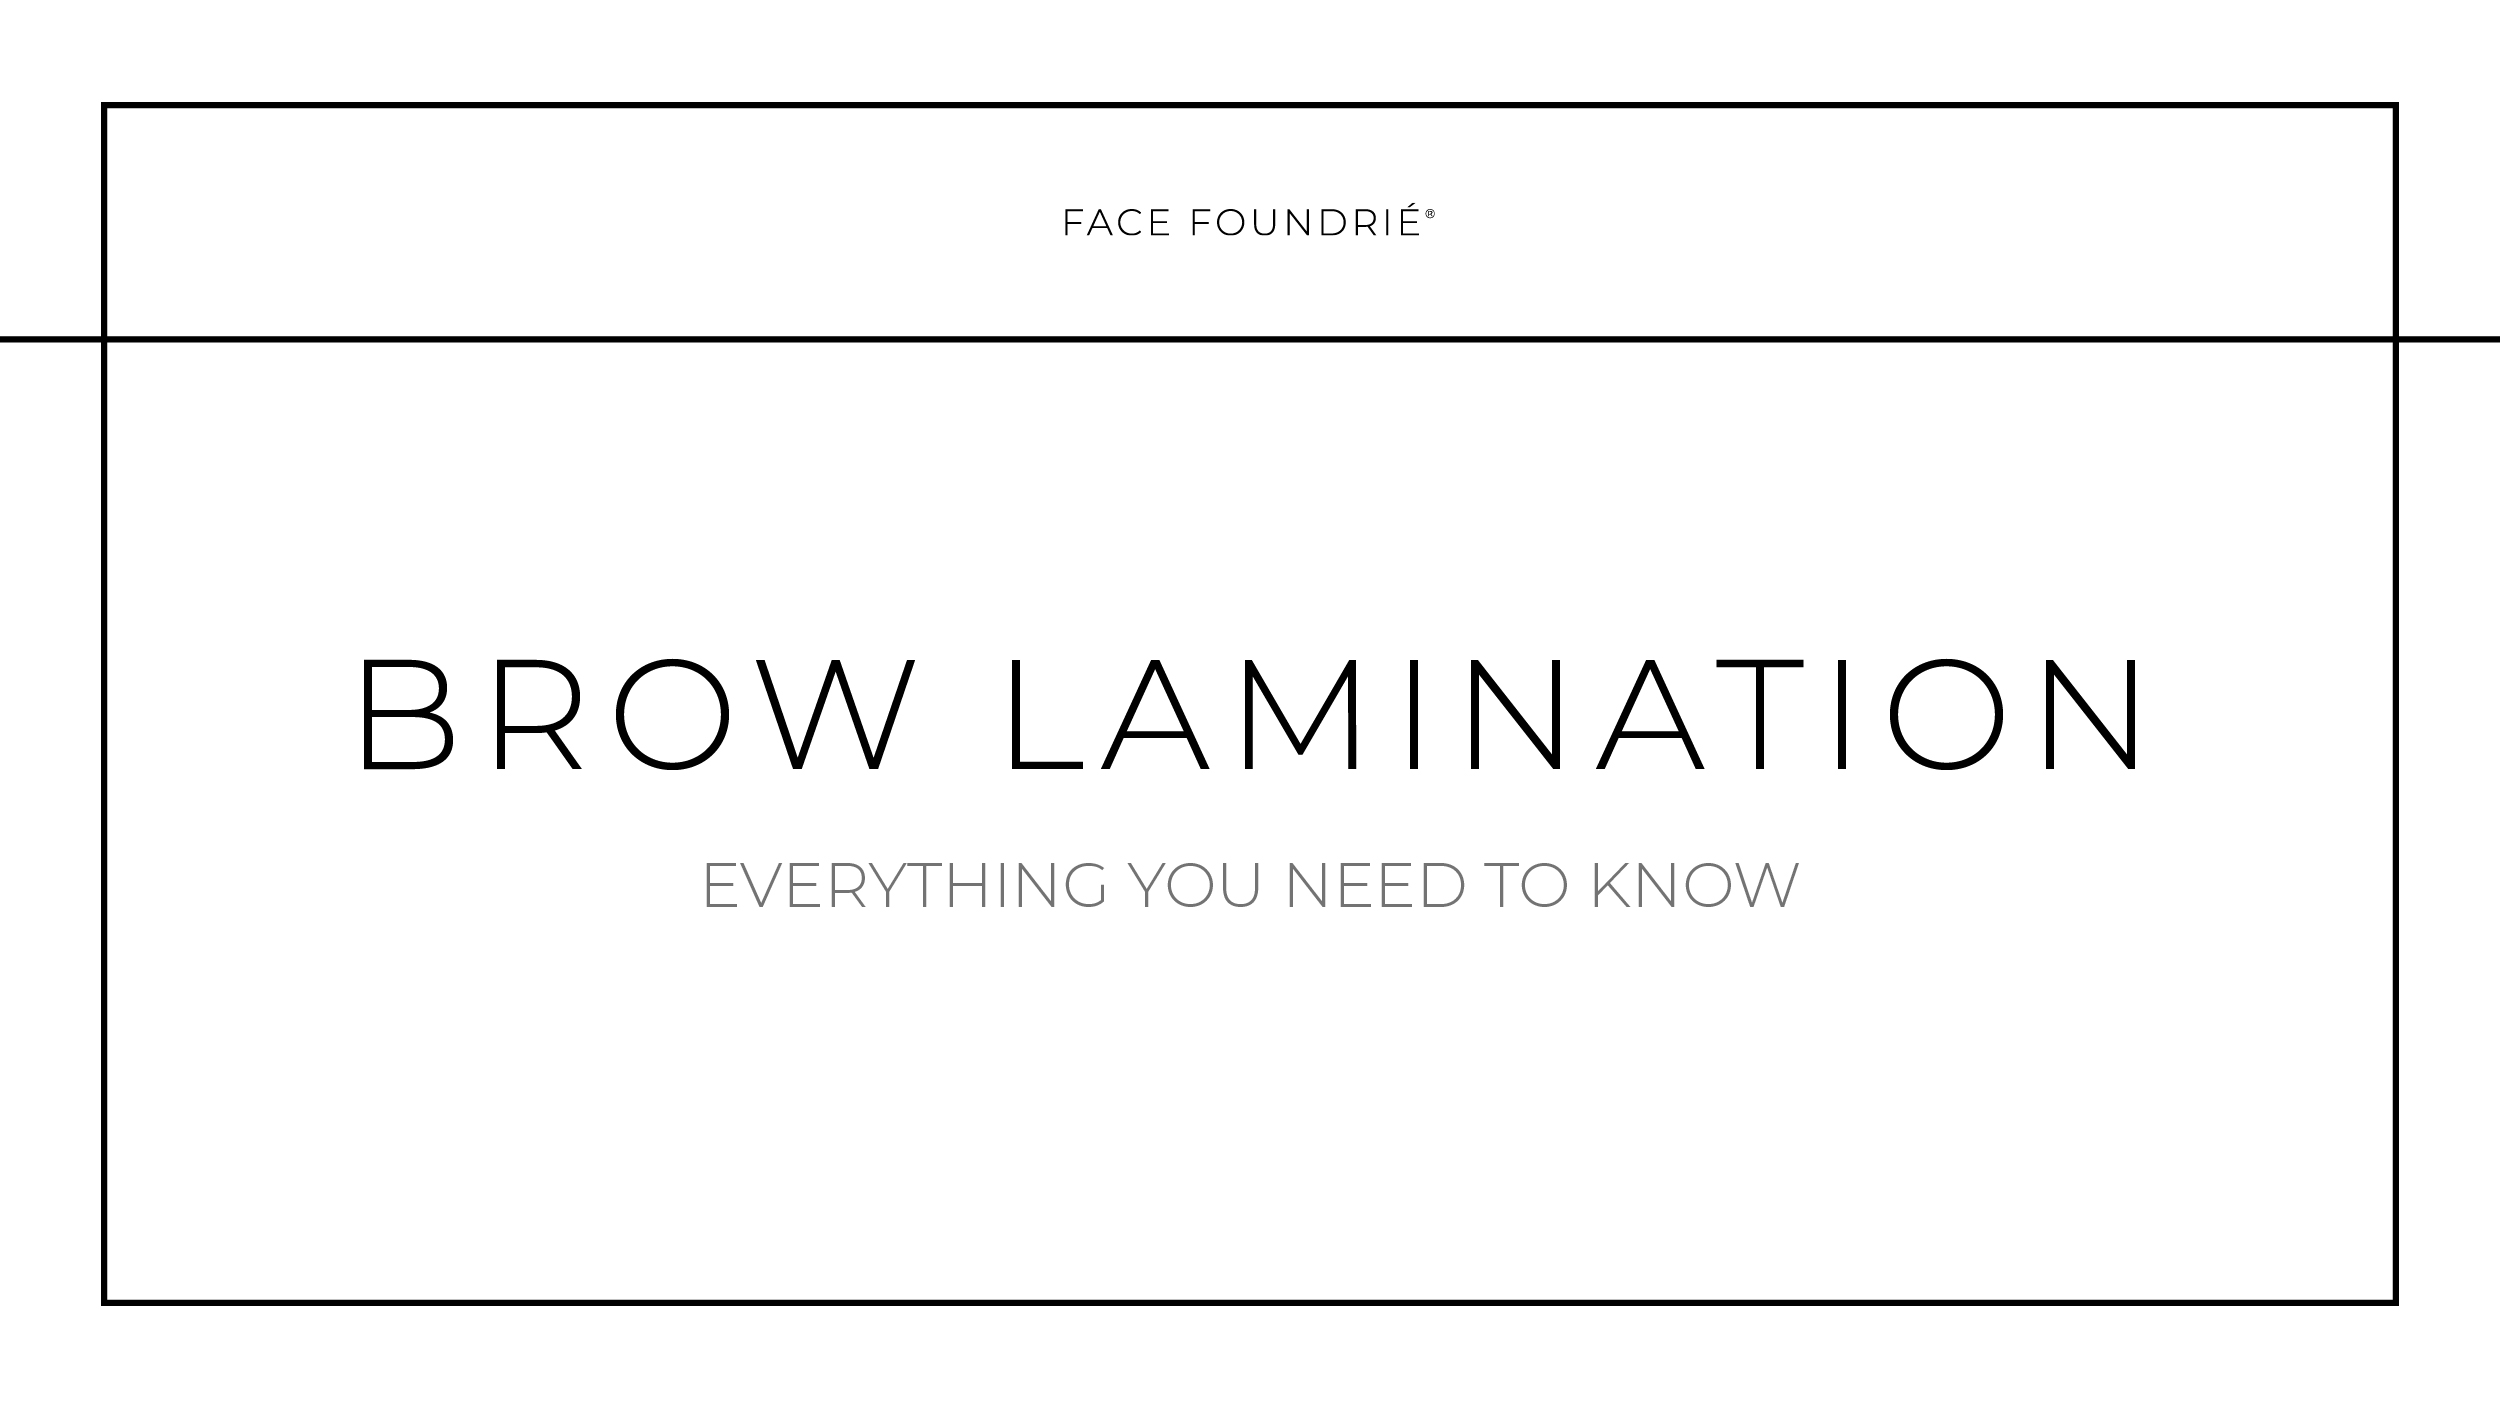 Brow Lamination: Everything You Need to Know